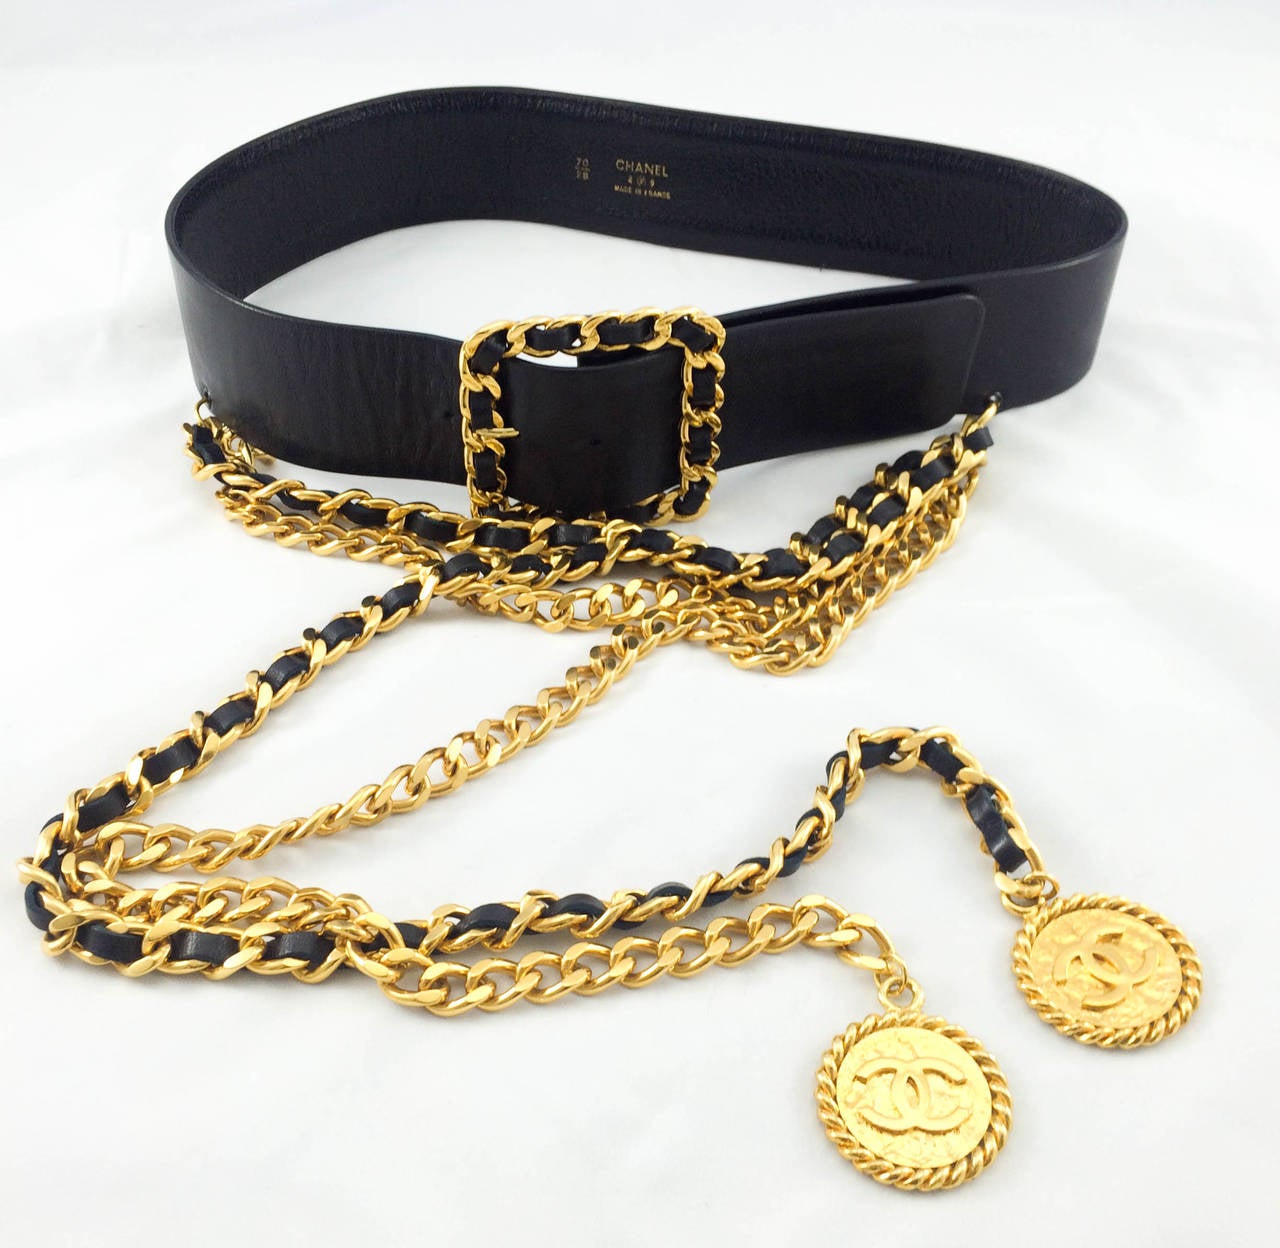 Chanel 1992 Runway Black Leather and Gold Tone Metal Belt 2